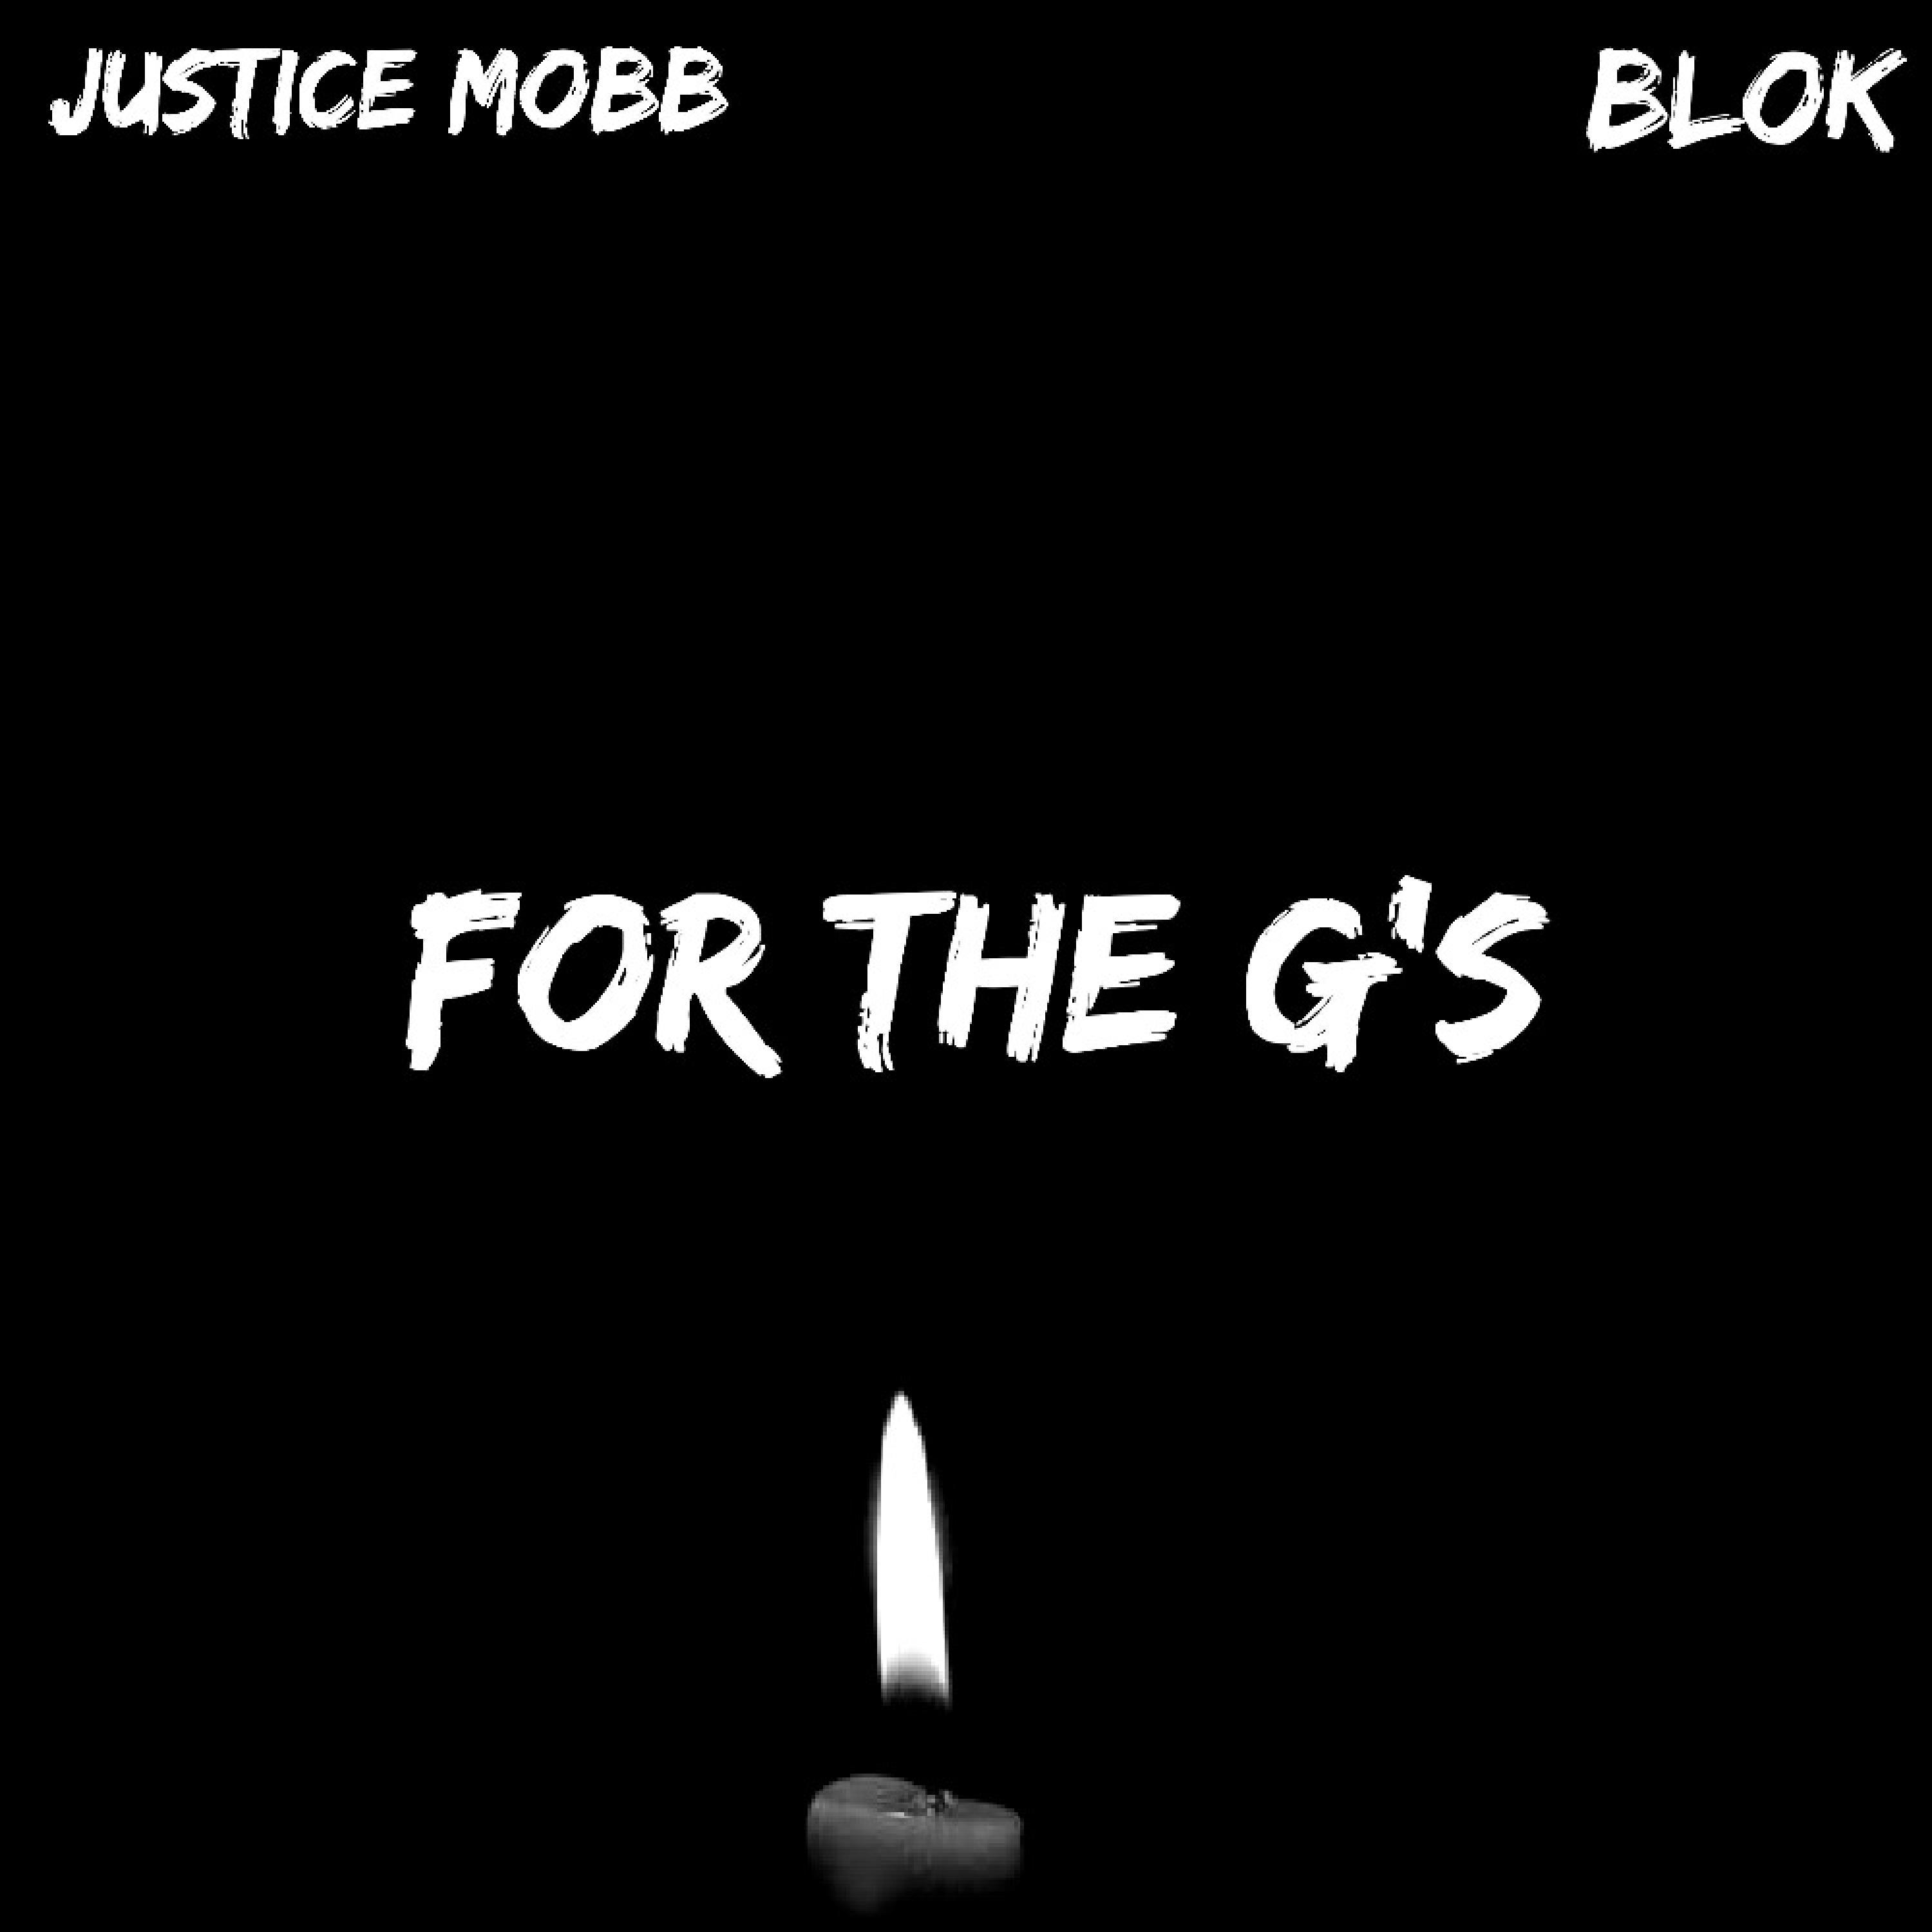 Justice Mobb - For The Gs (feat. Blok)